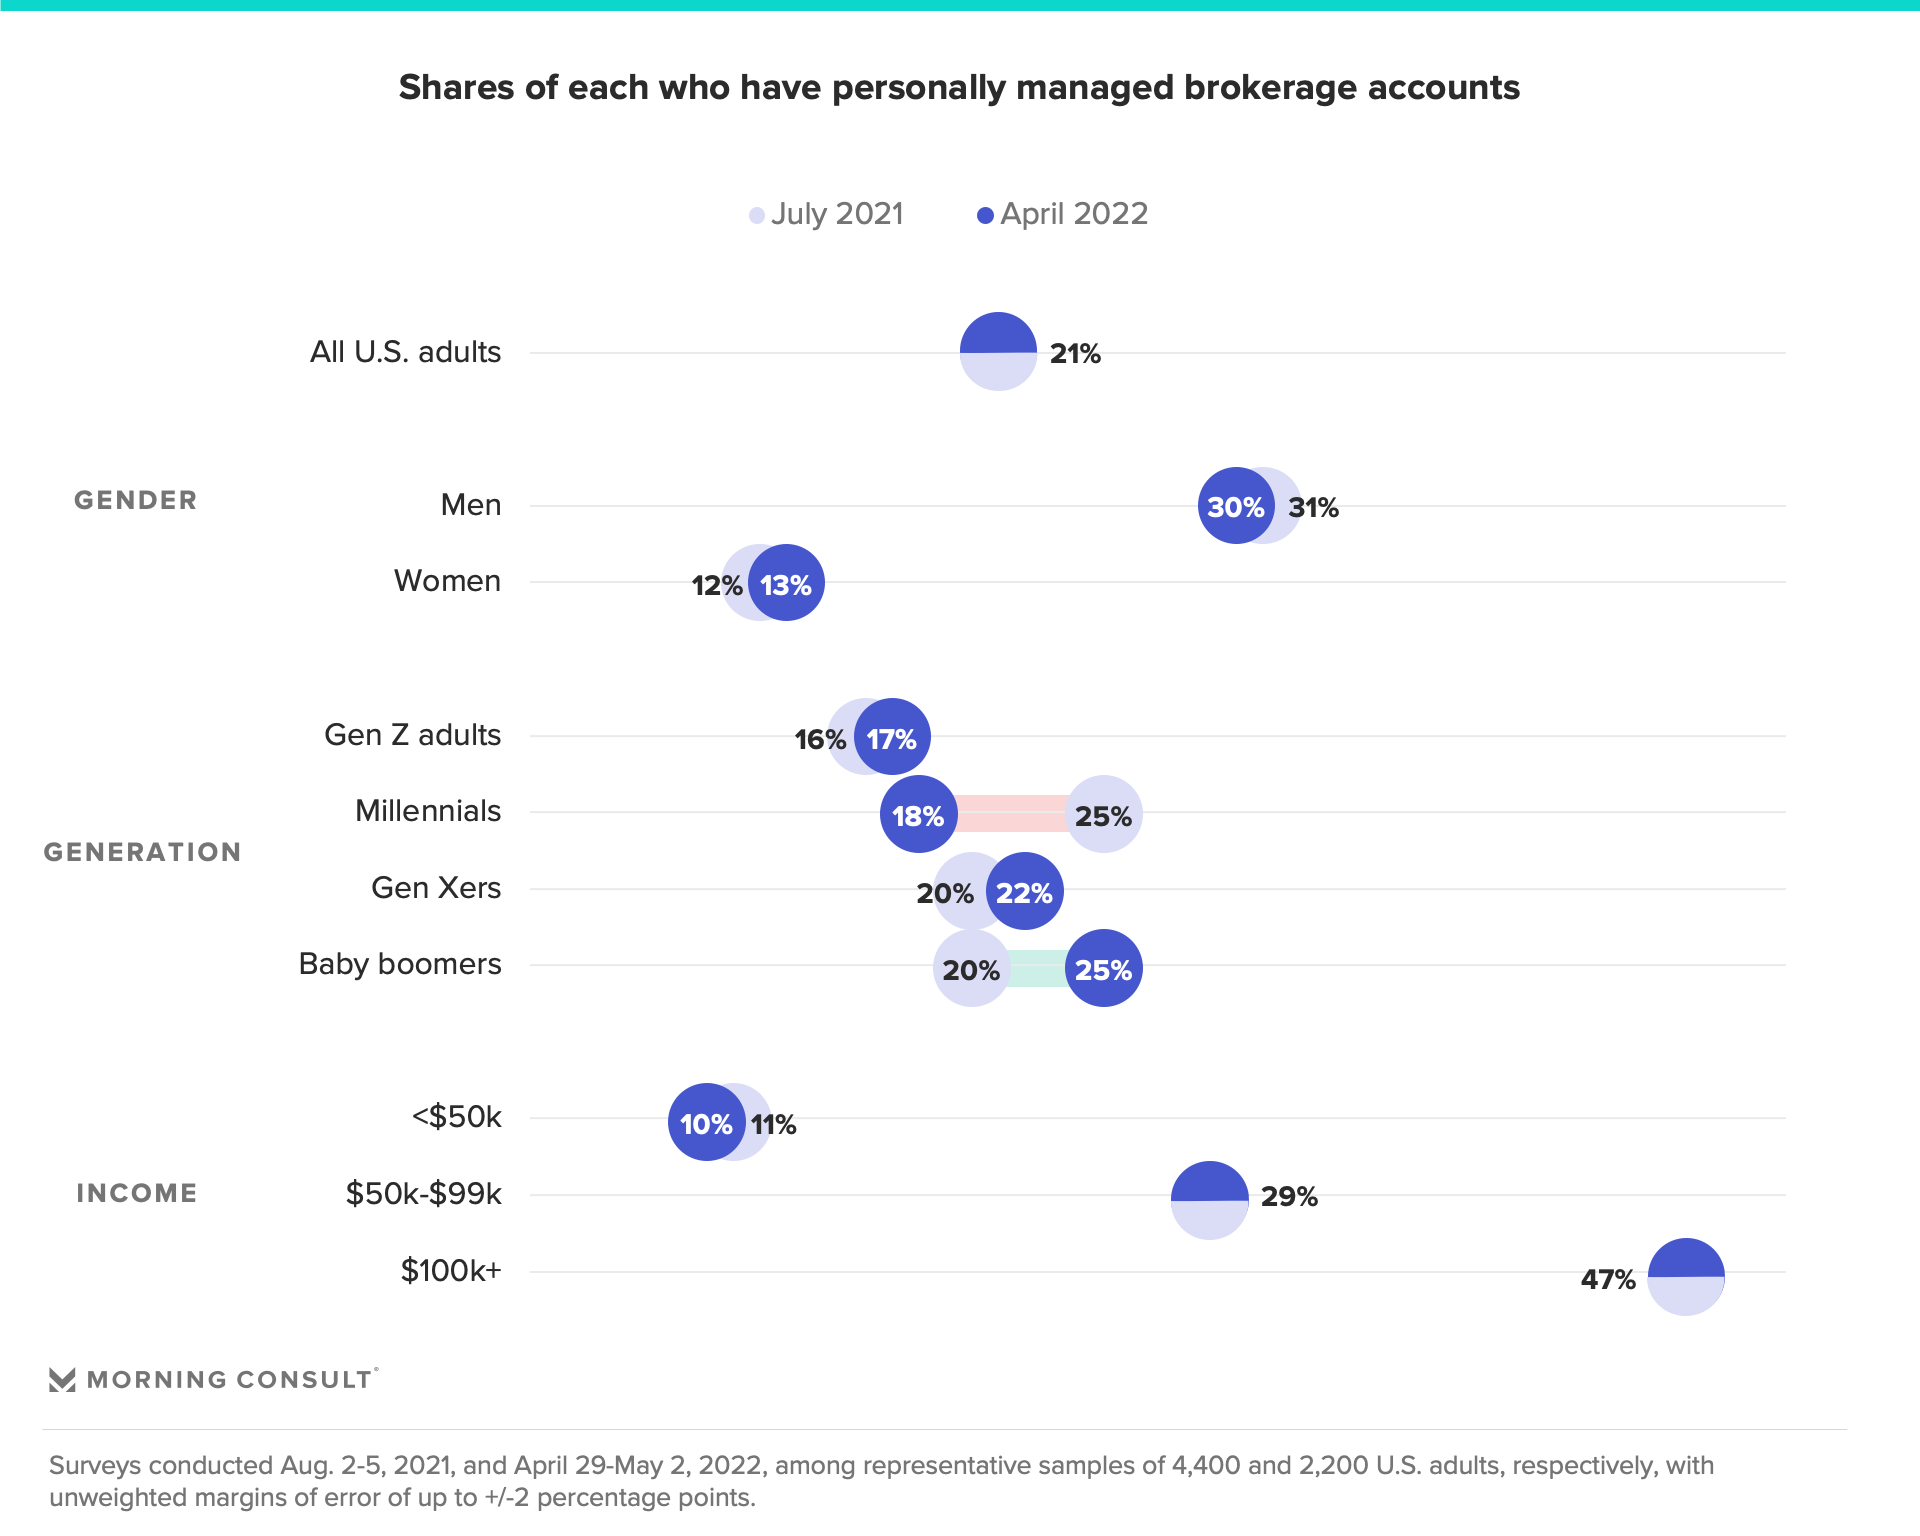 Shares of U.S. adults in 2021 and 2022 who have personally managed brokerage accounts by gender, generation and income